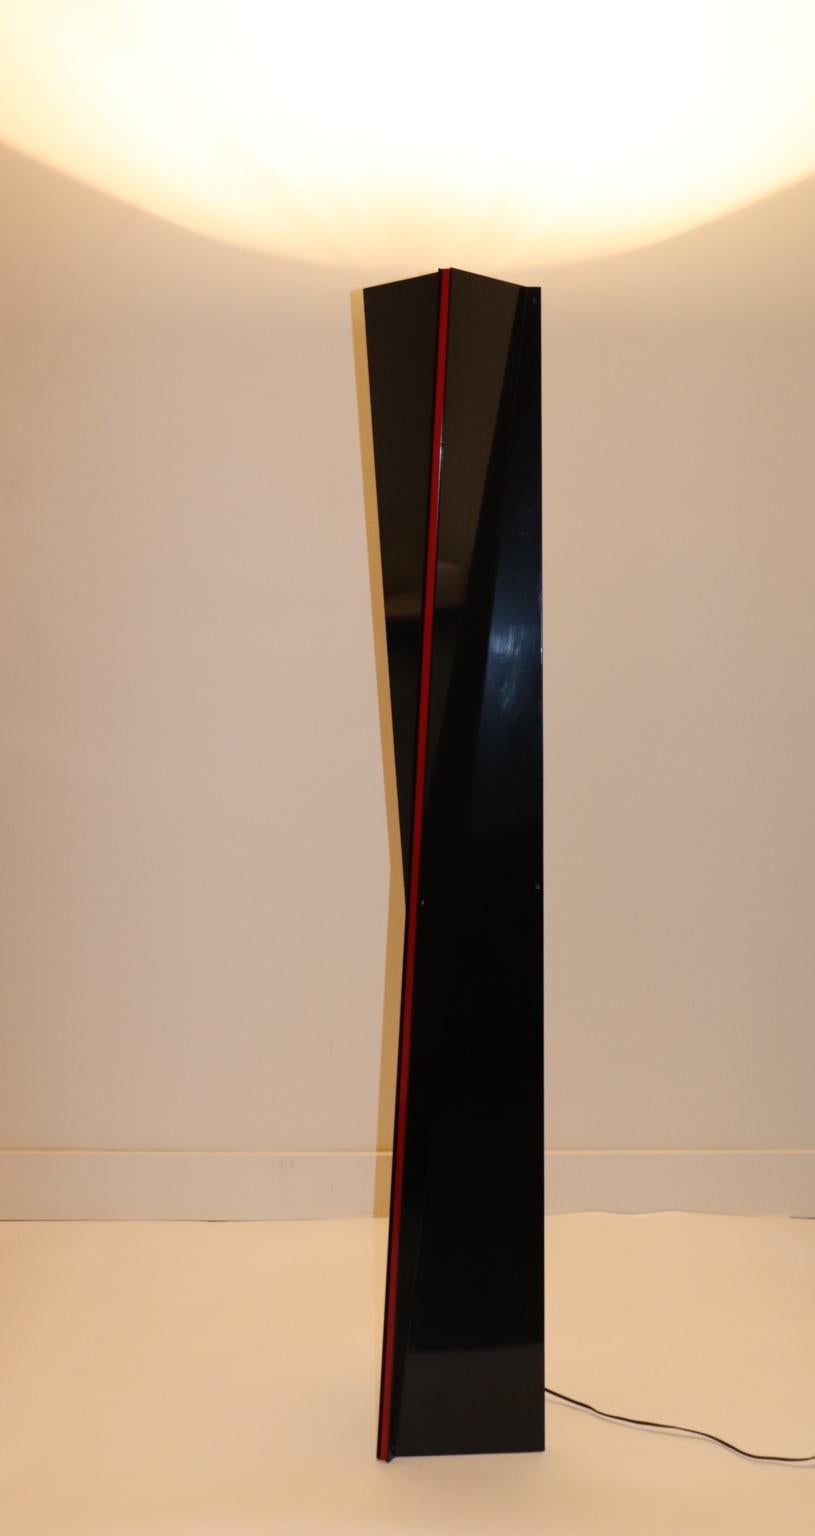 Italian sculptured floor lamp. Black lacquered aluminum with red stripes details.
The 